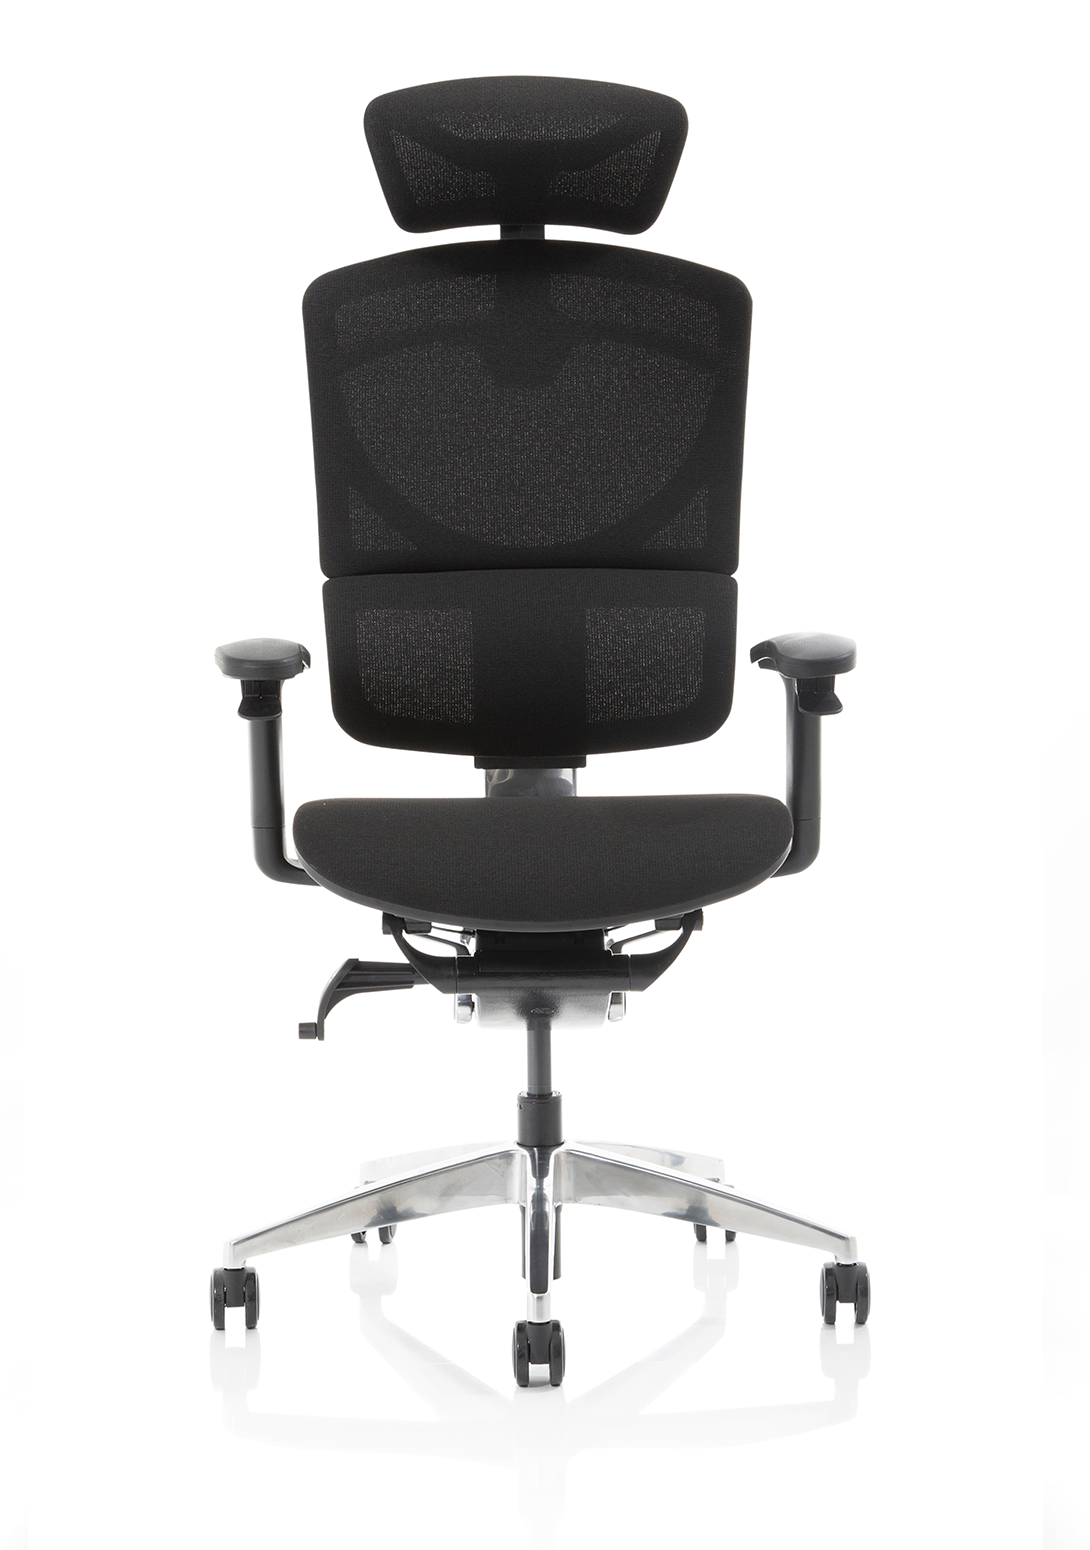 Ergo Click Plus High Back Ergonomic Posture Office Chair with Arms and Headrest